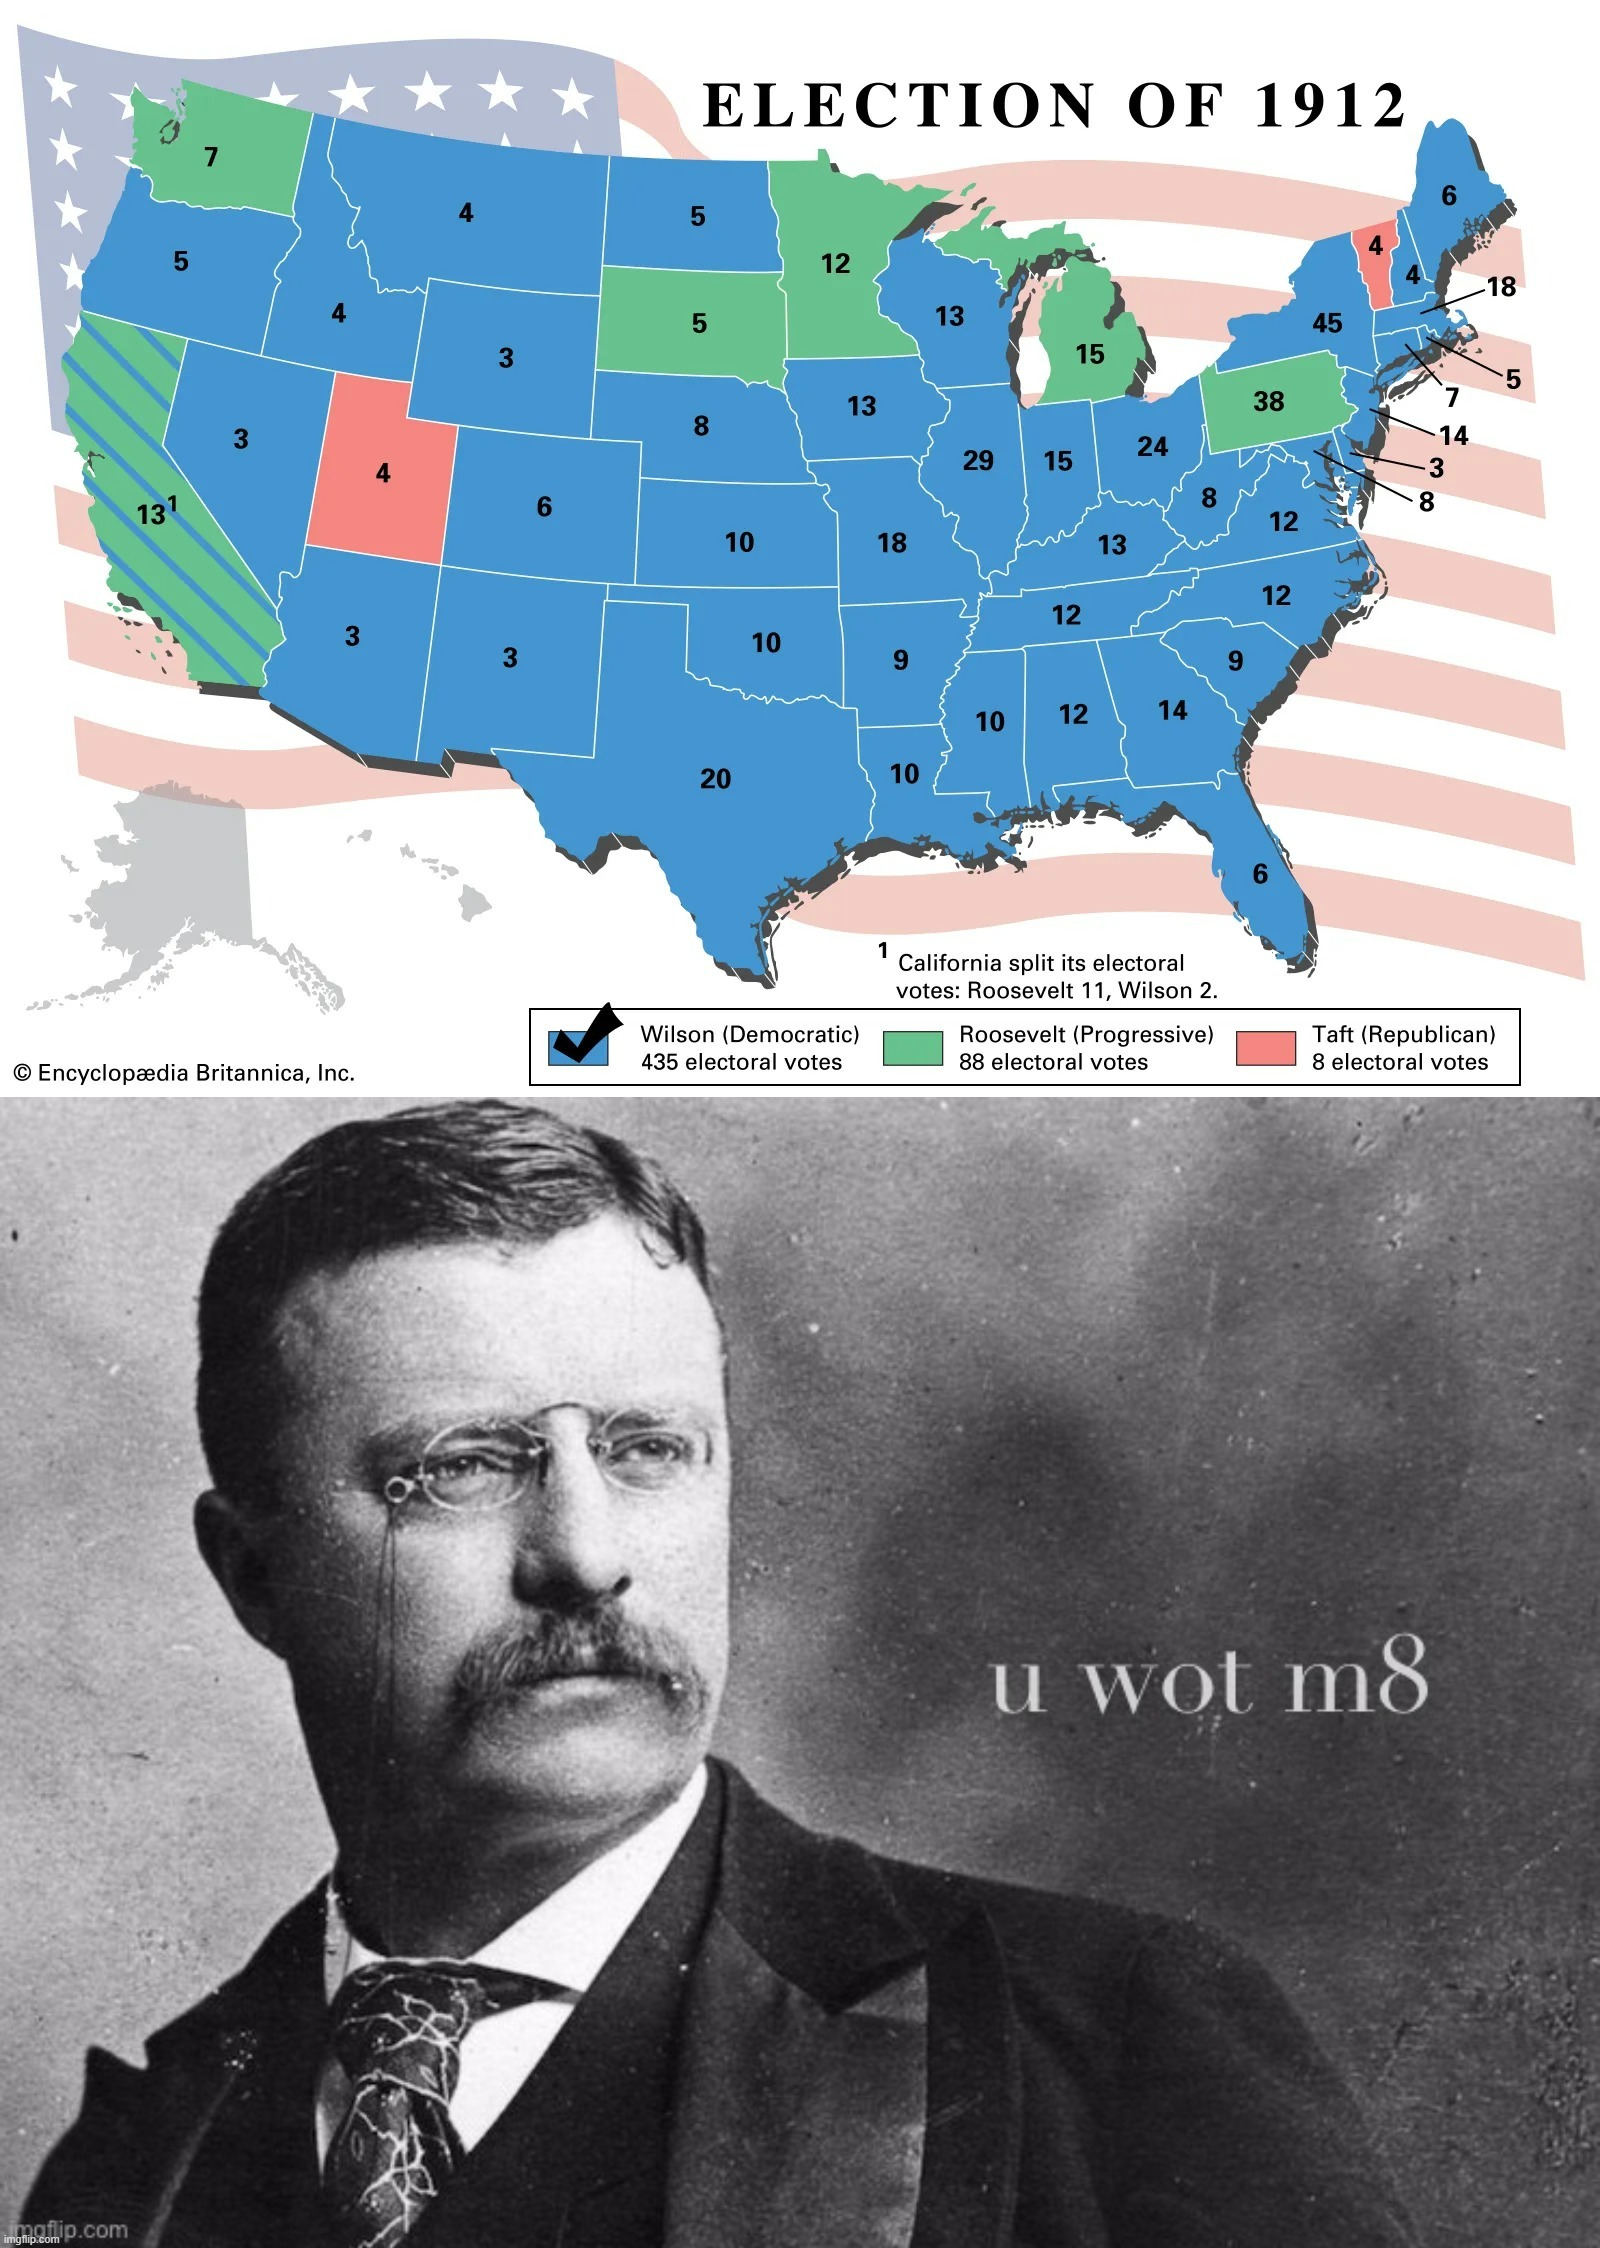 image tagged in election of 1912,teddy roosevelt u wot m8 | made w/ Imgflip meme maker